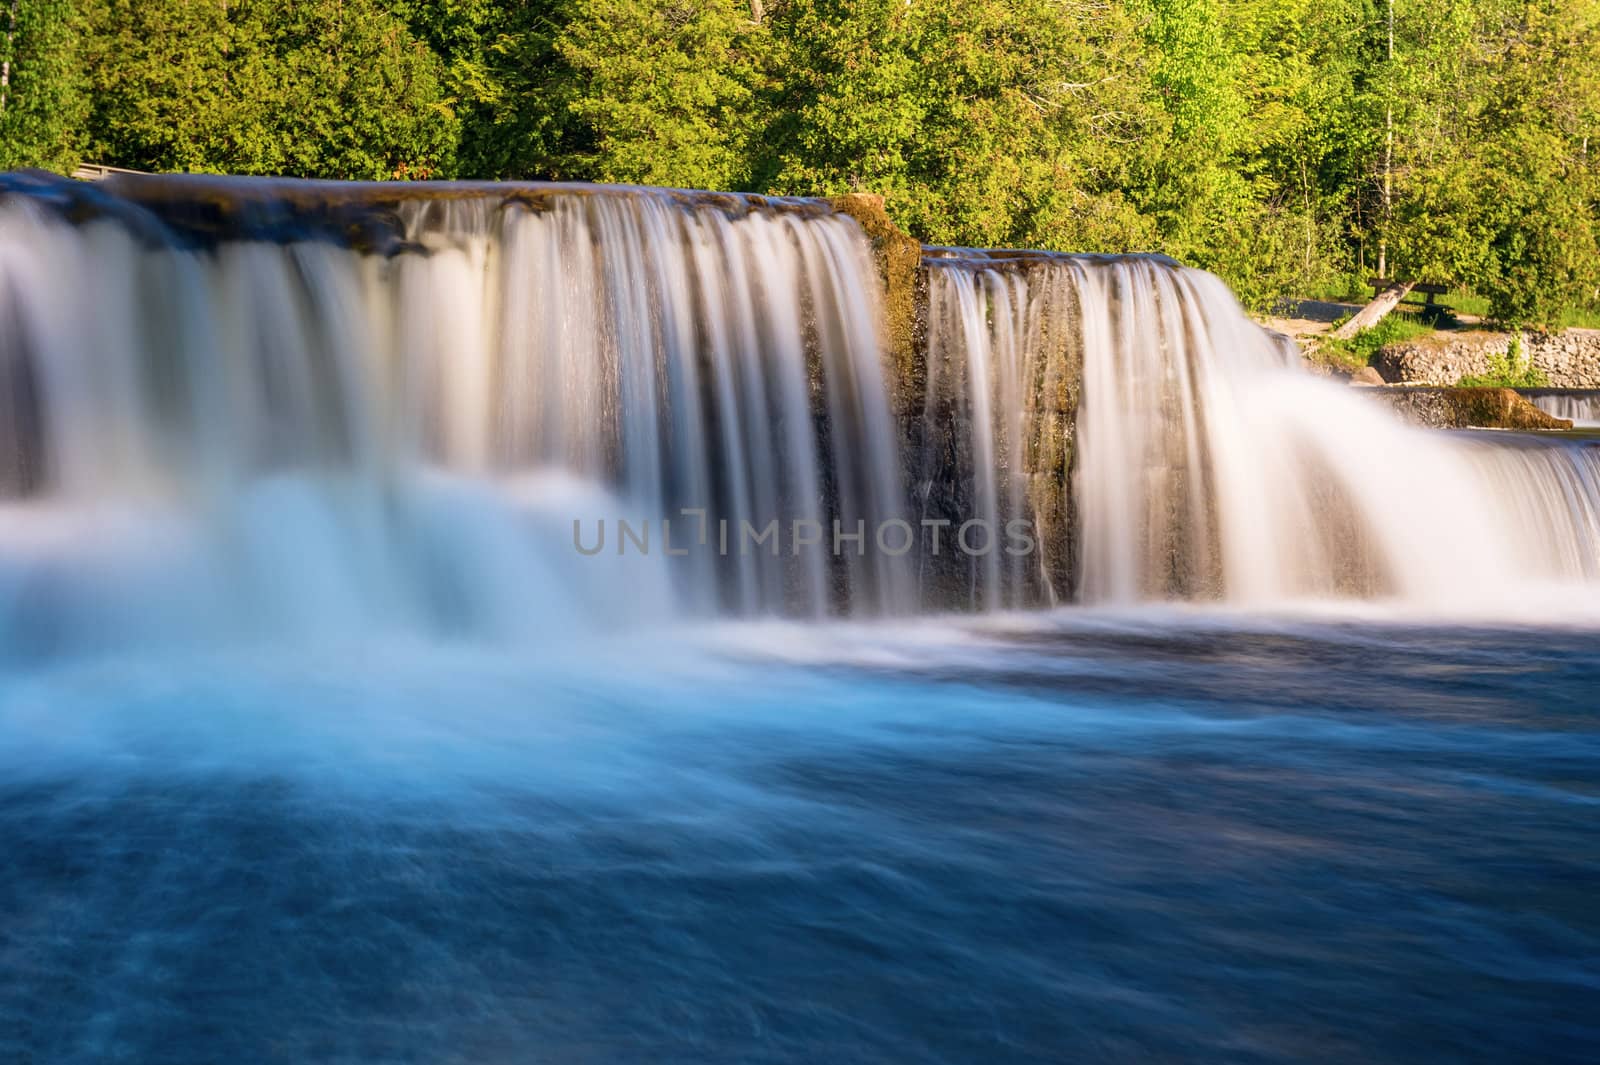 Sauble Falls Provincial Park is located in the community of Sauble Falls, town of South Bruce Peninsula, Bruce County in southwestern Ontario, Canada. It is in the lower drainage basin of the Sauble River, which flows into Lake Huron.